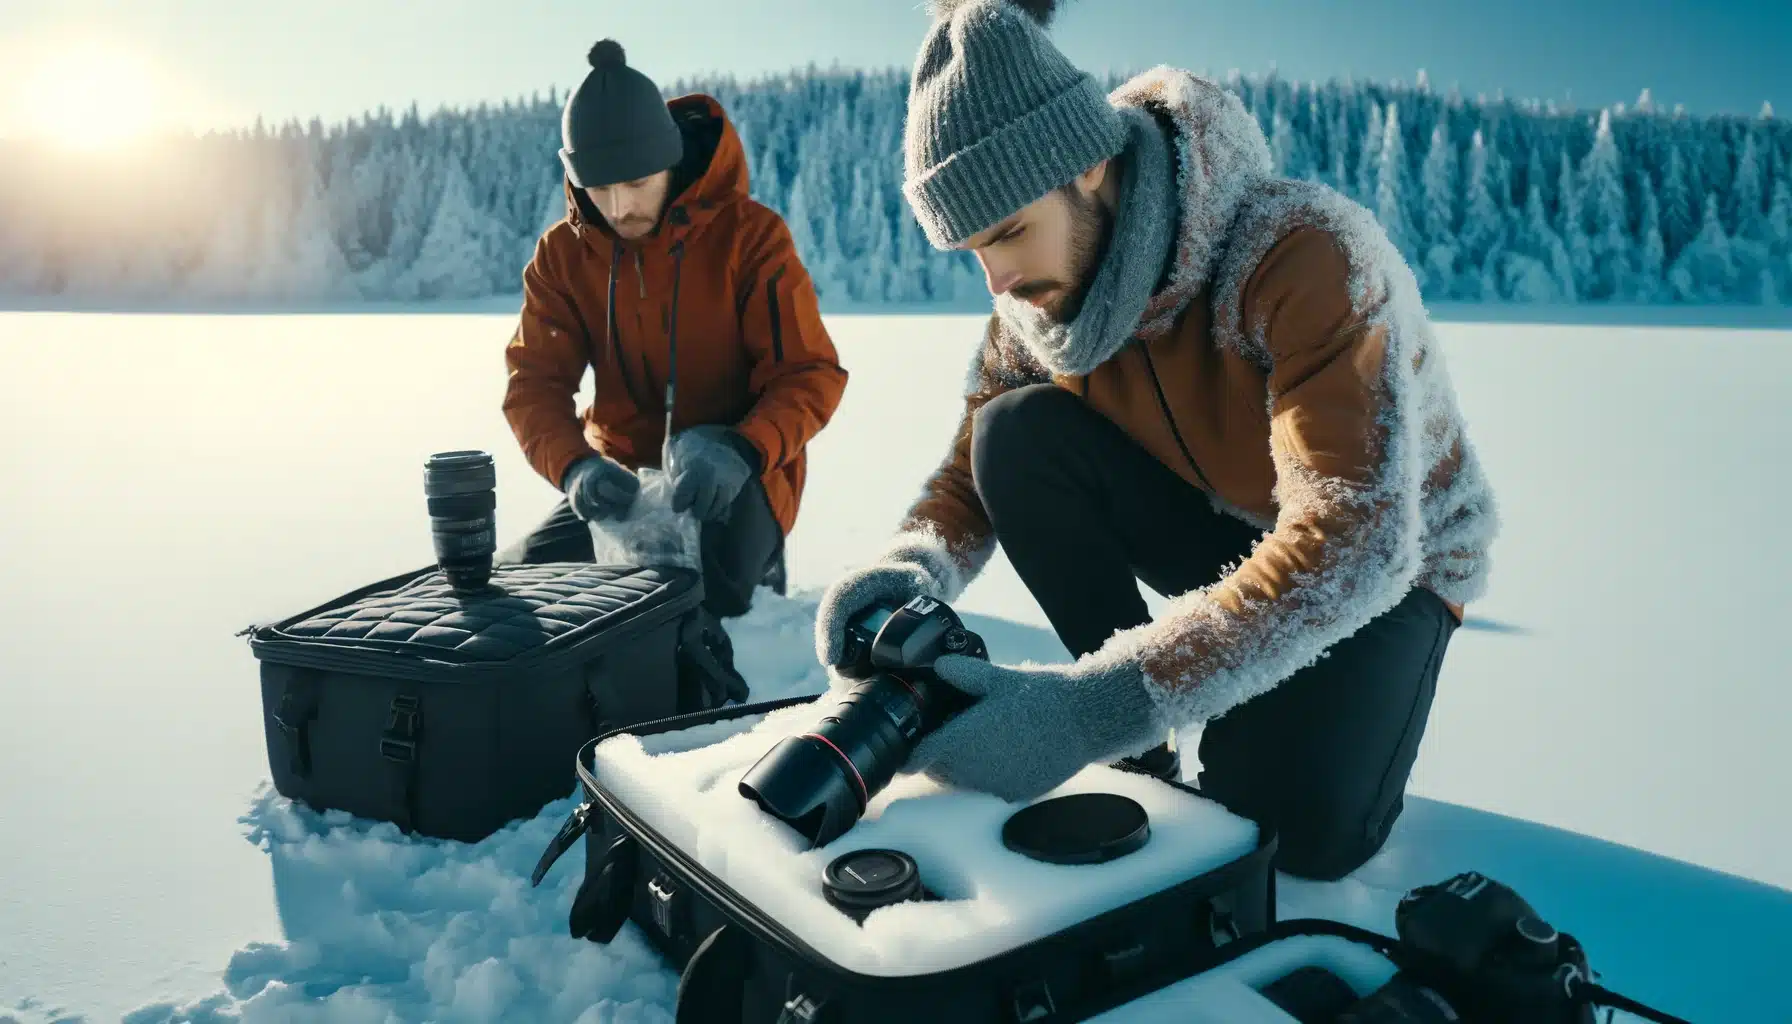 Two people in a snowy outdoor setting, one wrapping a camera in protective covering and the other placing gear into insulated bags. Both are dressed in warm clothing and gloves, with a snow-covered landscape in the background.